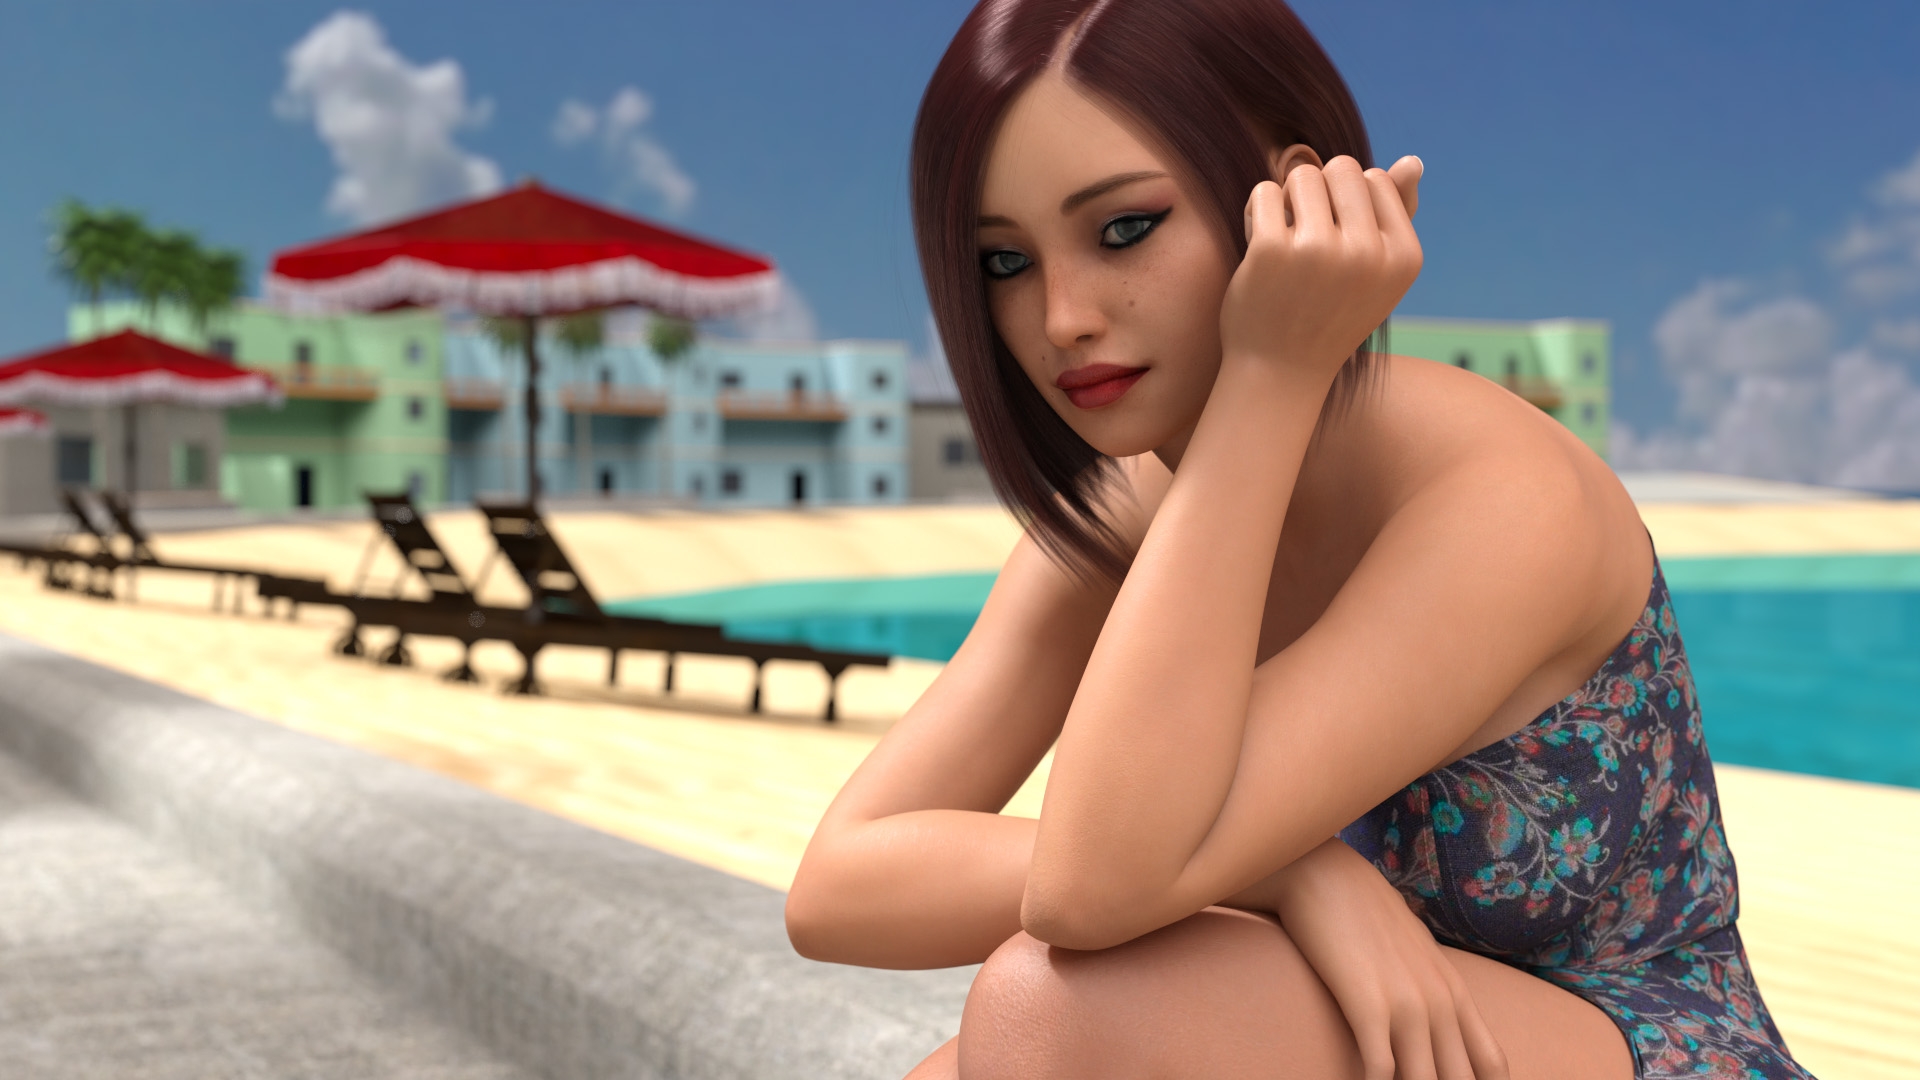 Summer with Mia 2 is a 3DCG adult game developed by Inceton Games, you will...